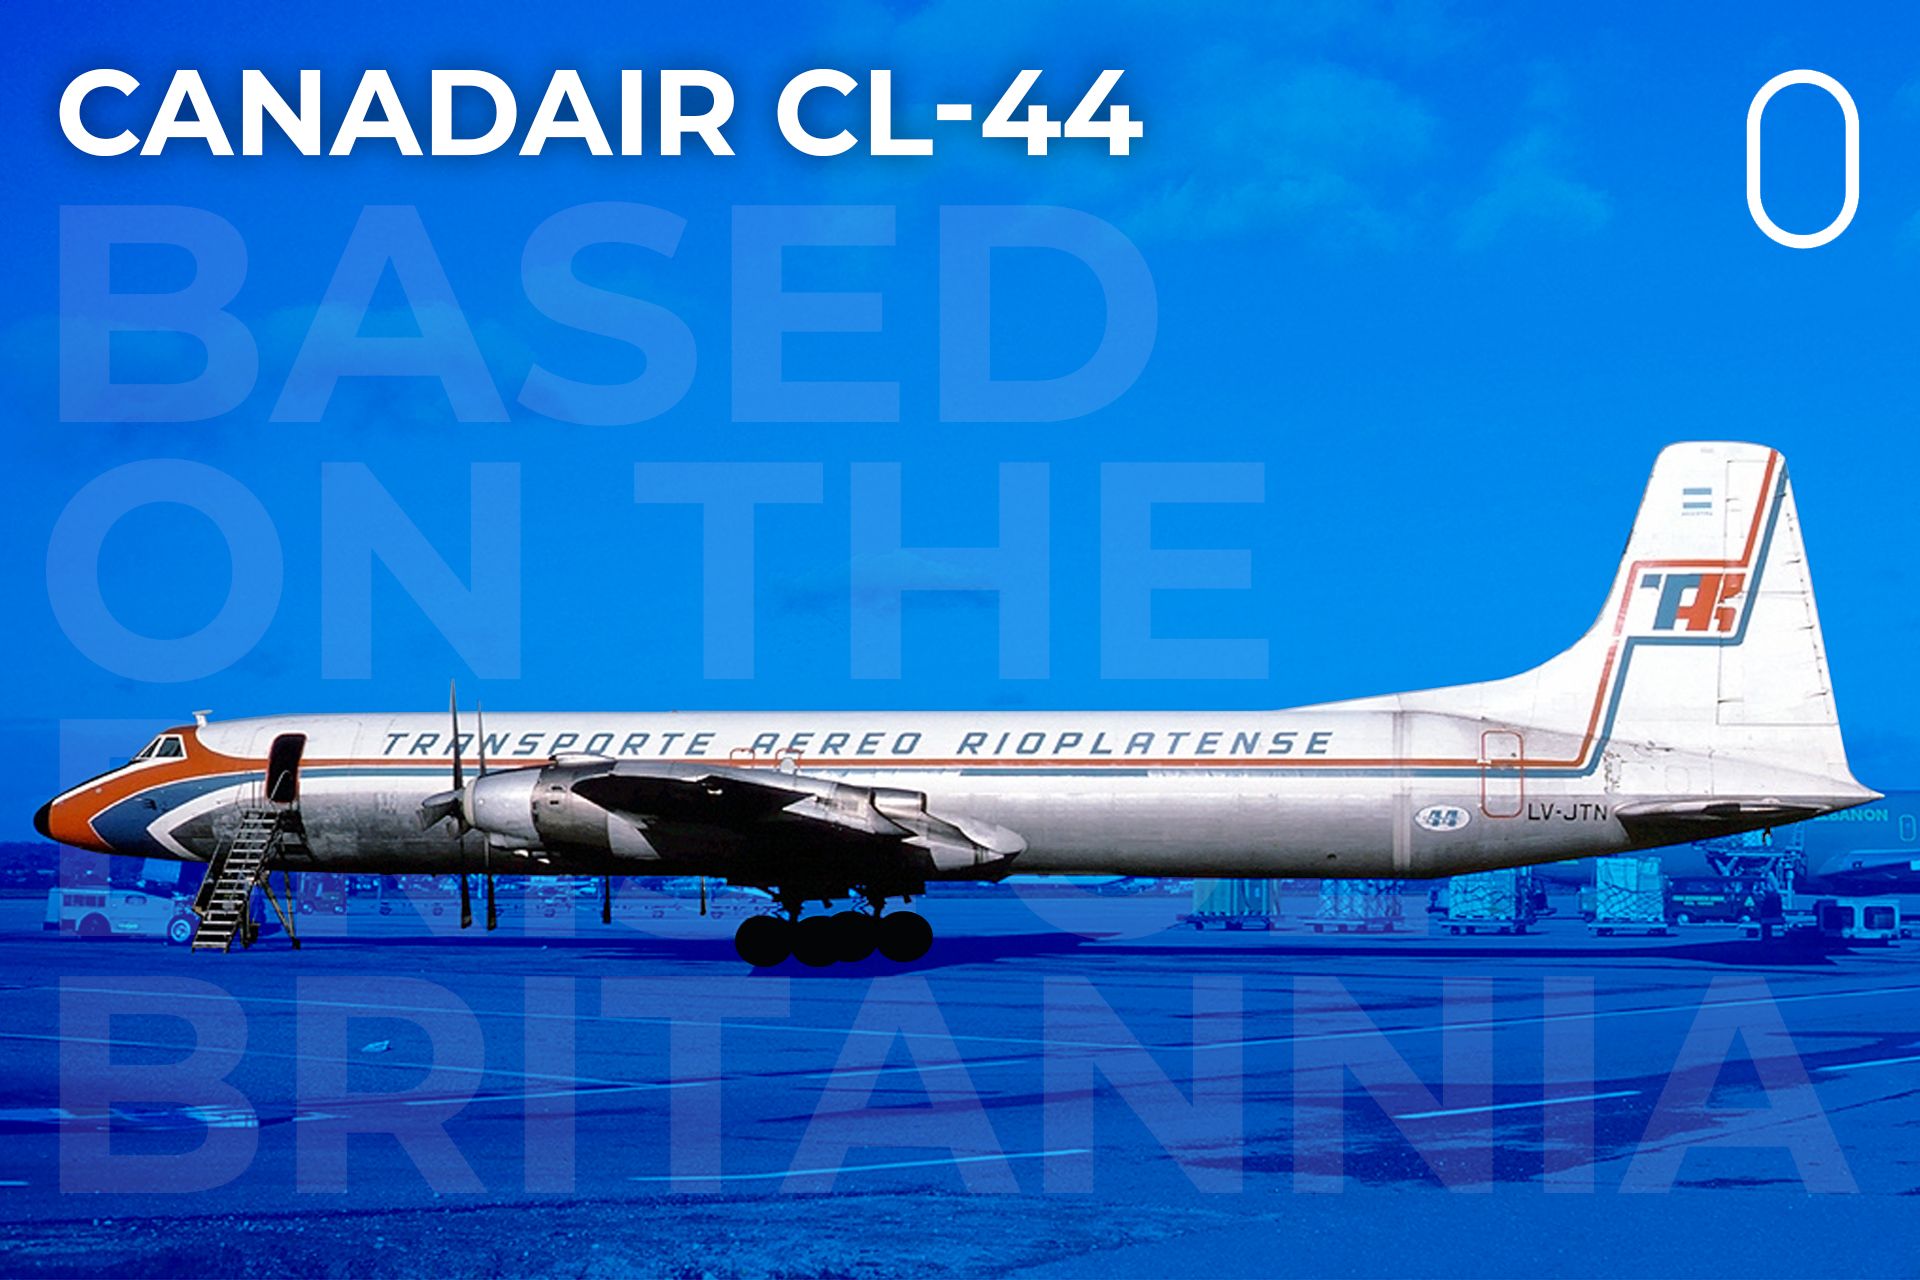 Based On The Bristol Britannia: The Story Of The Canadair CL-44